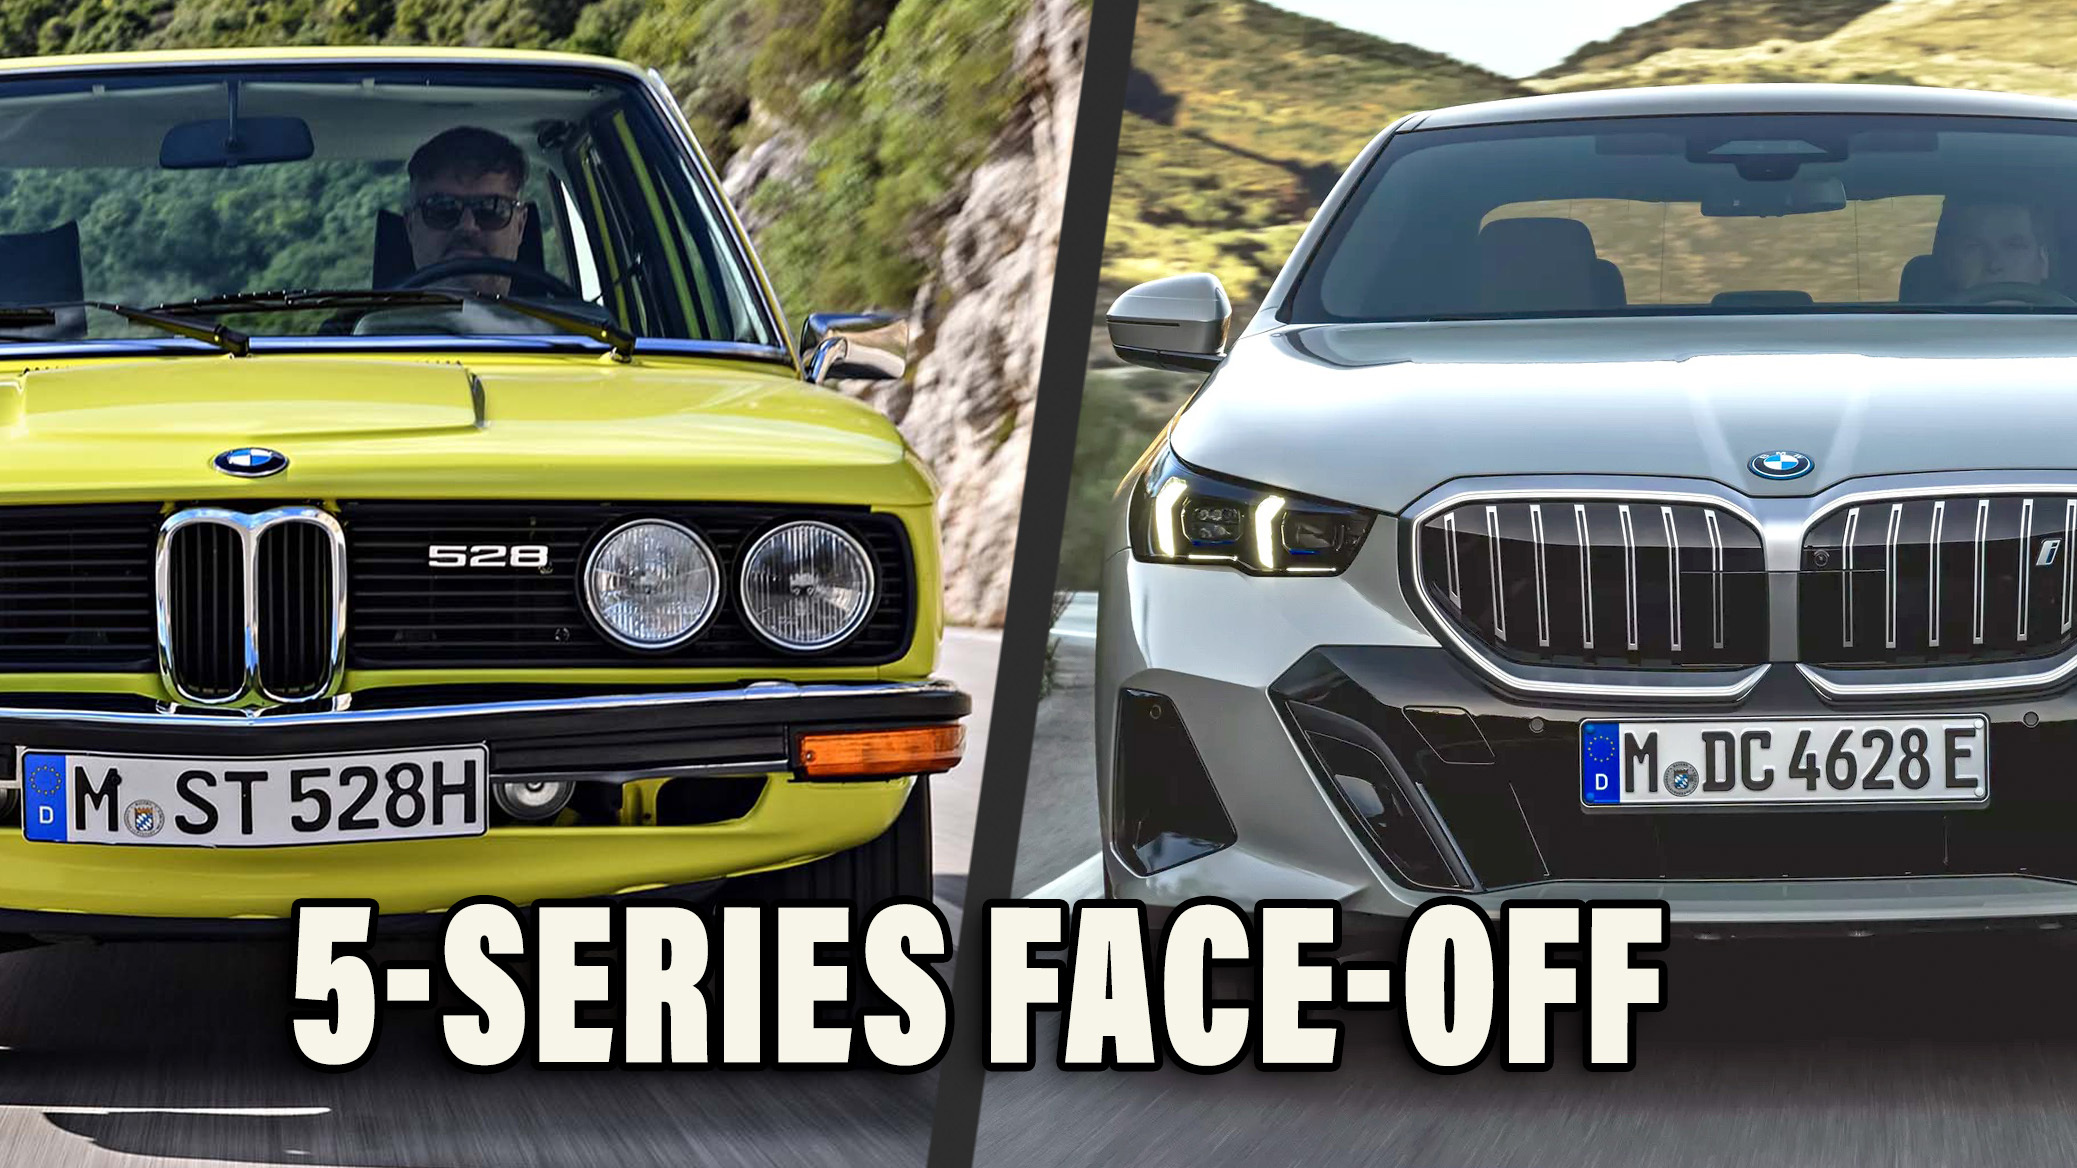 BMW's G30 5-Series Vs F10 5-Series: Out With The Old, In With The New